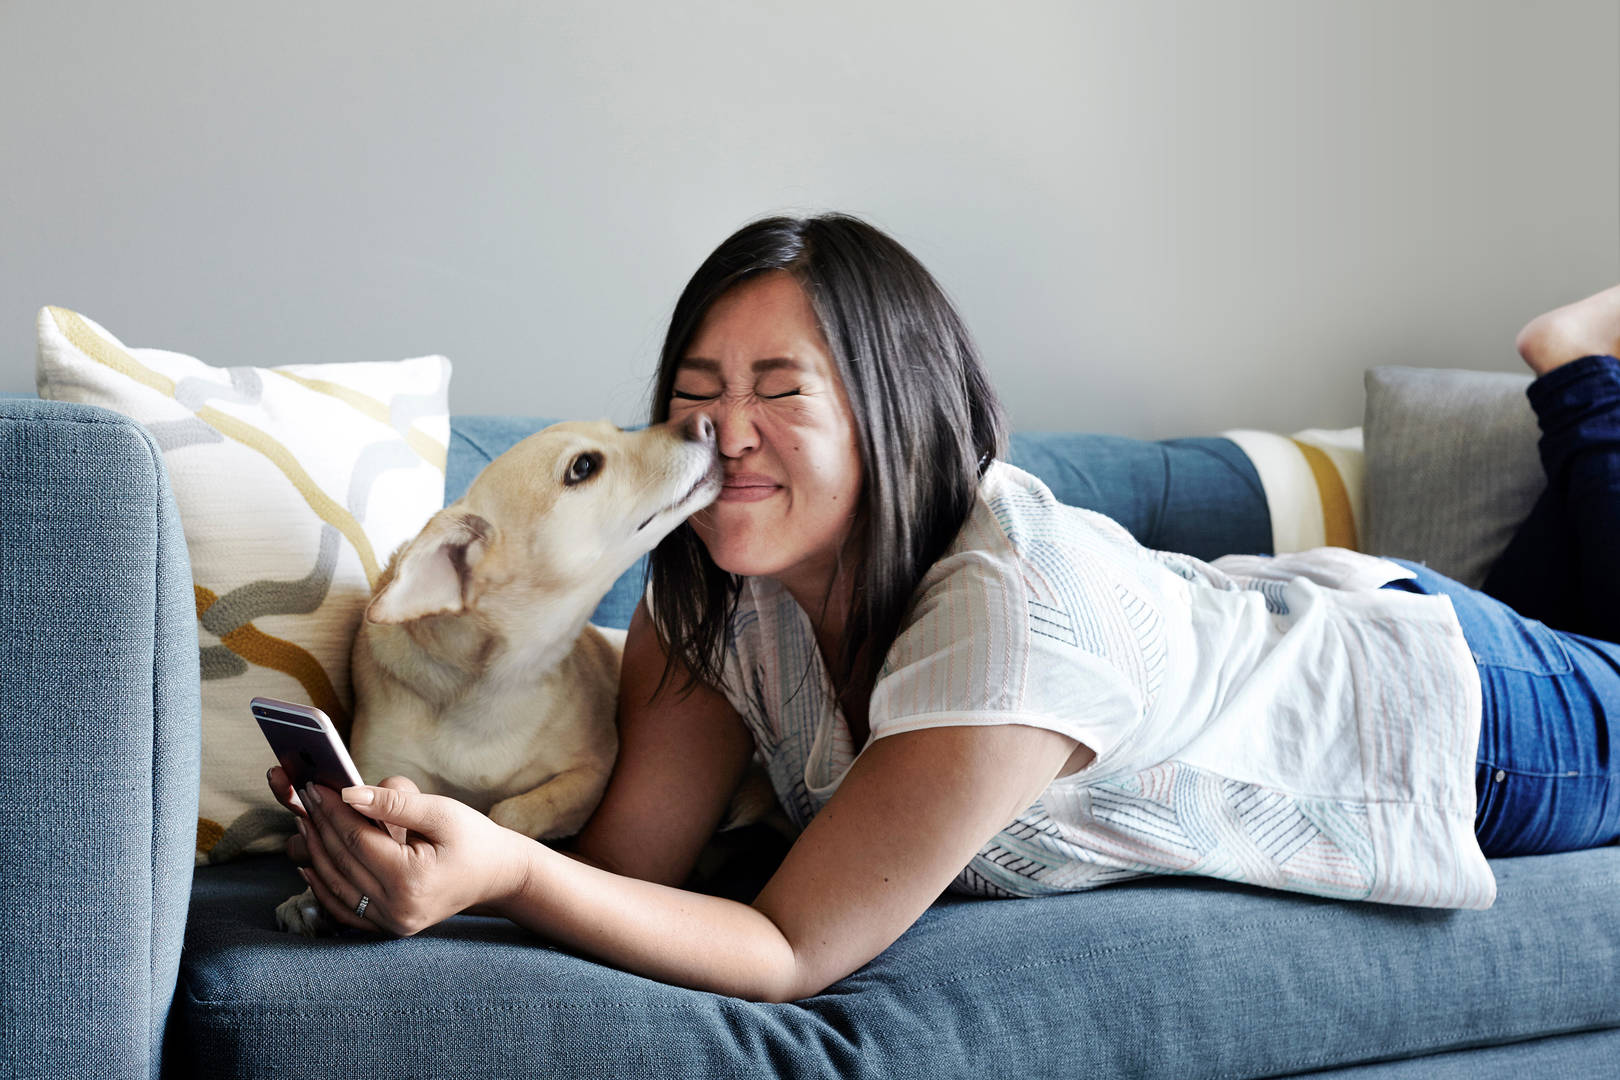 Asian woman texting with dog